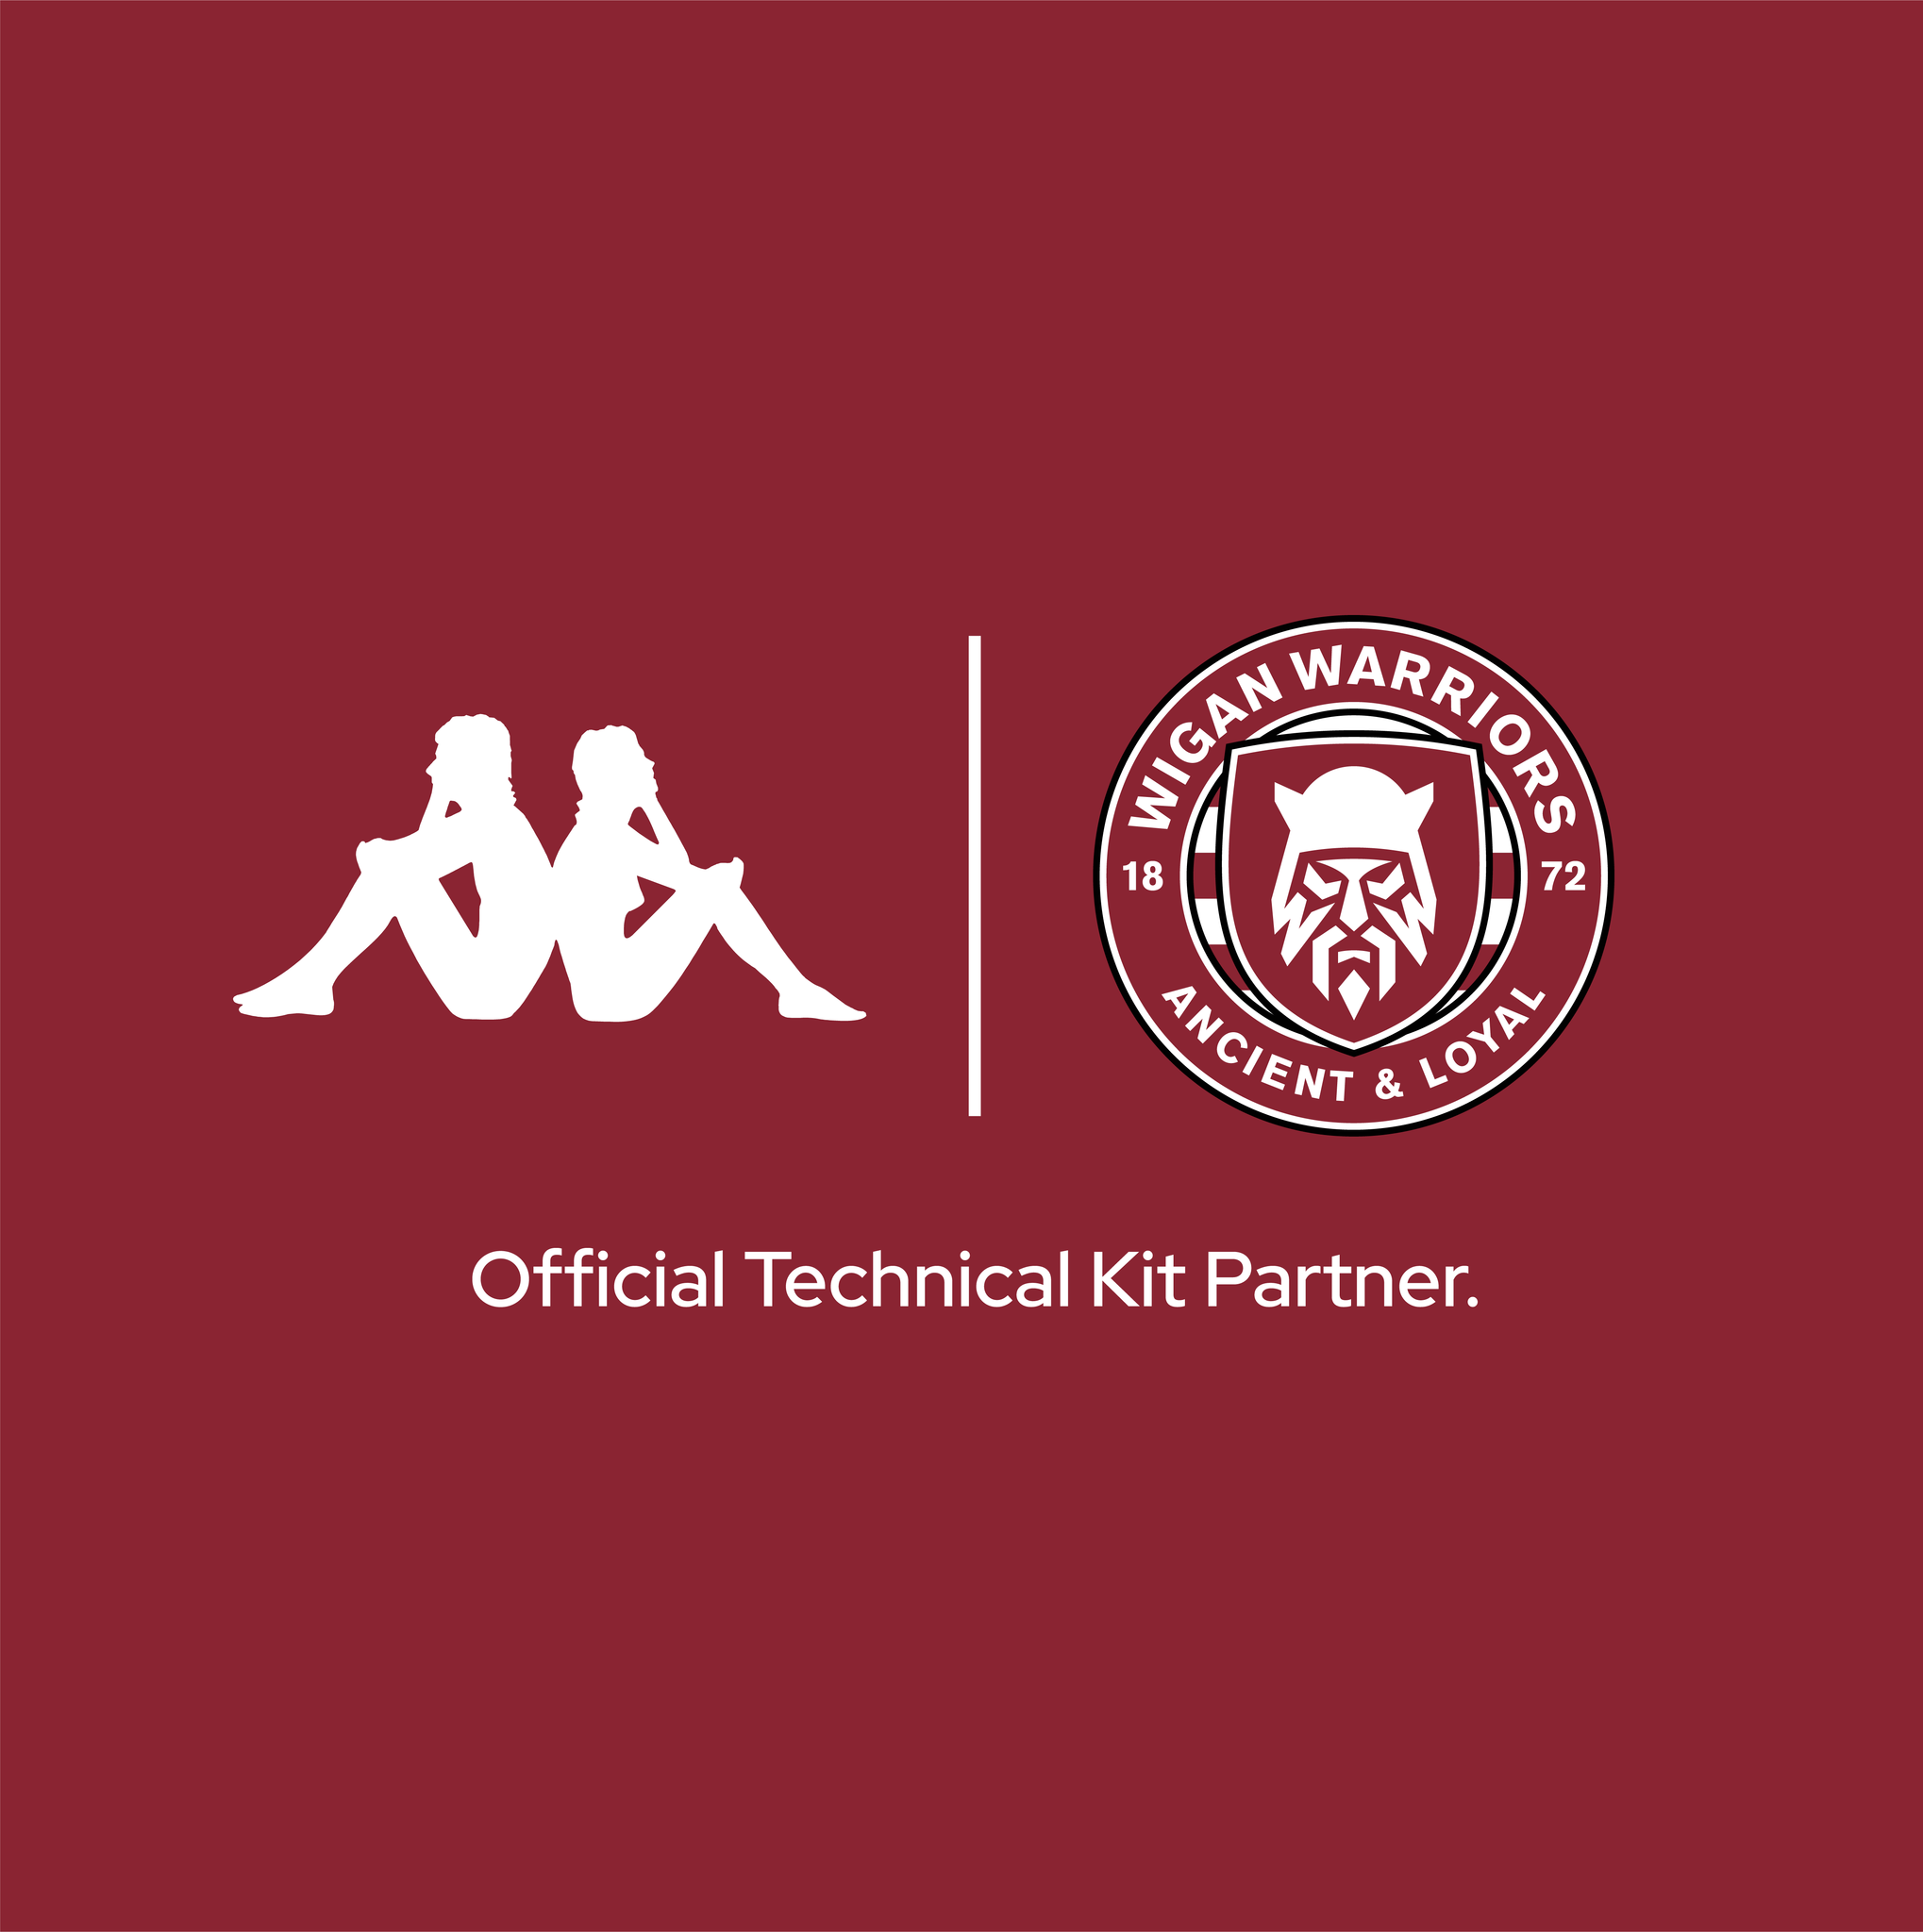 Kappa is Proud to Become the Official Technical Kit Partner to Wigan Warriors